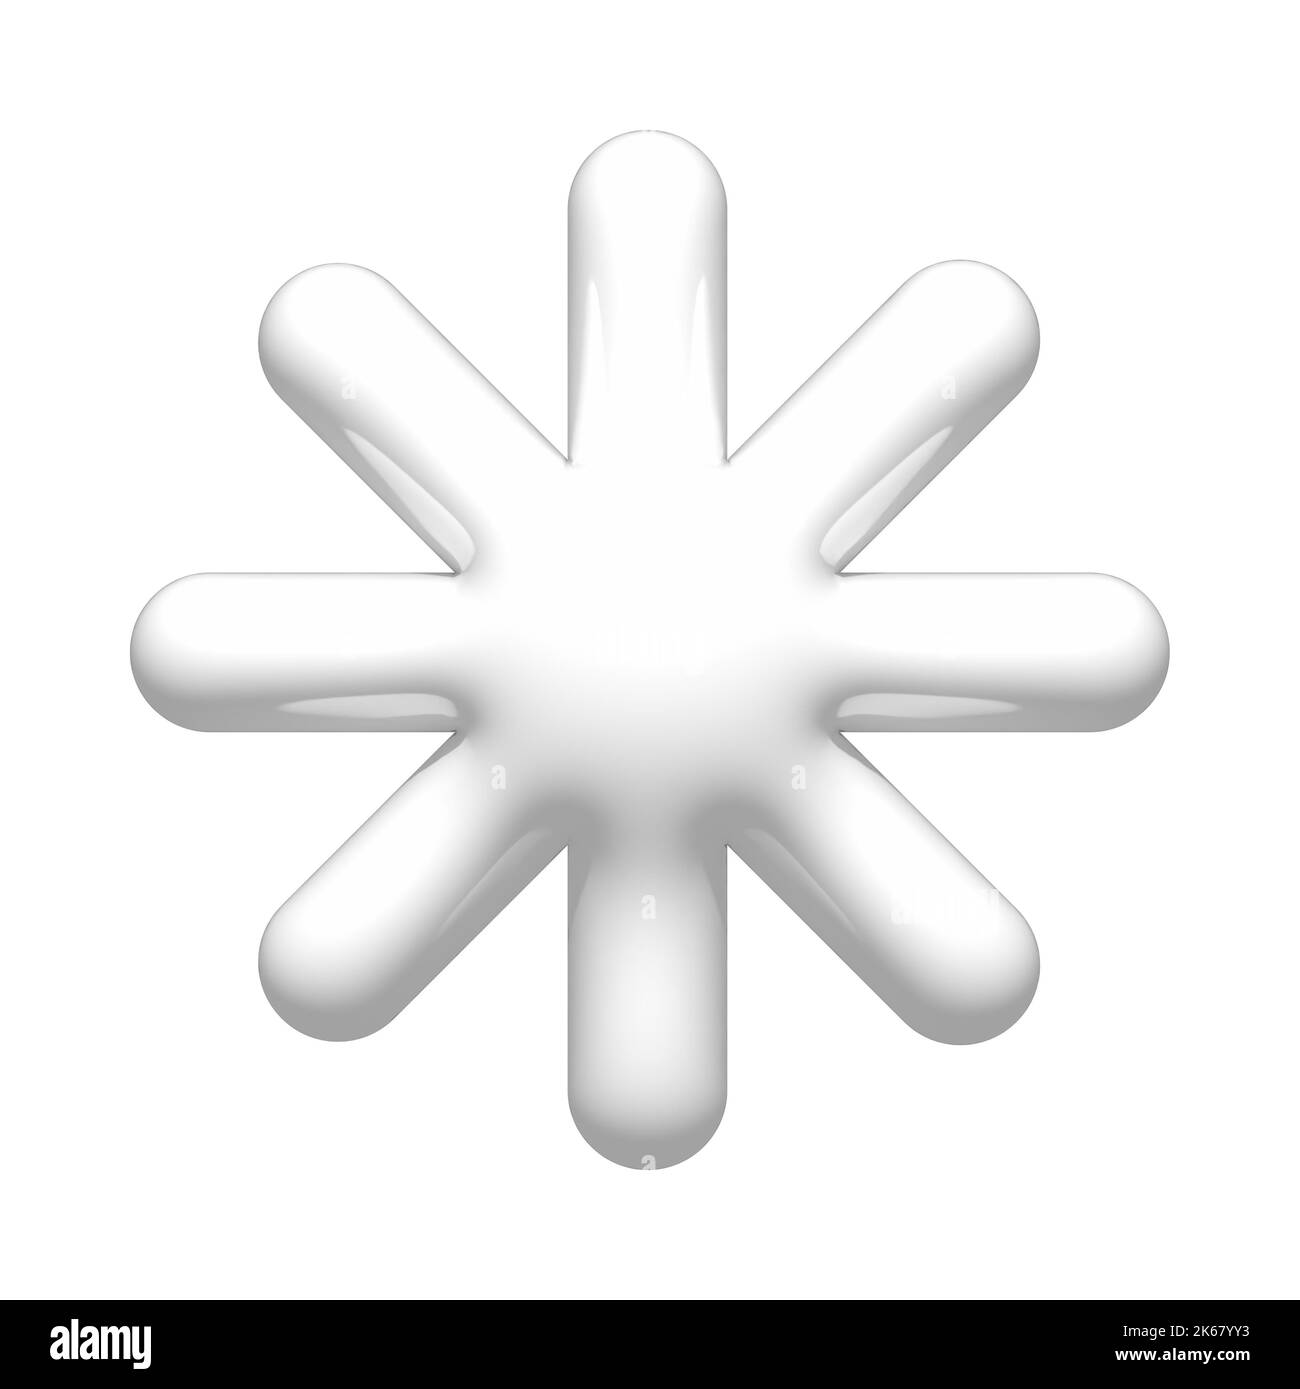 3D white snowflake icon. 3d snow weather element isolated on white background. Realistic glossy plastic 3d render design illustration for forecast Stock Photo